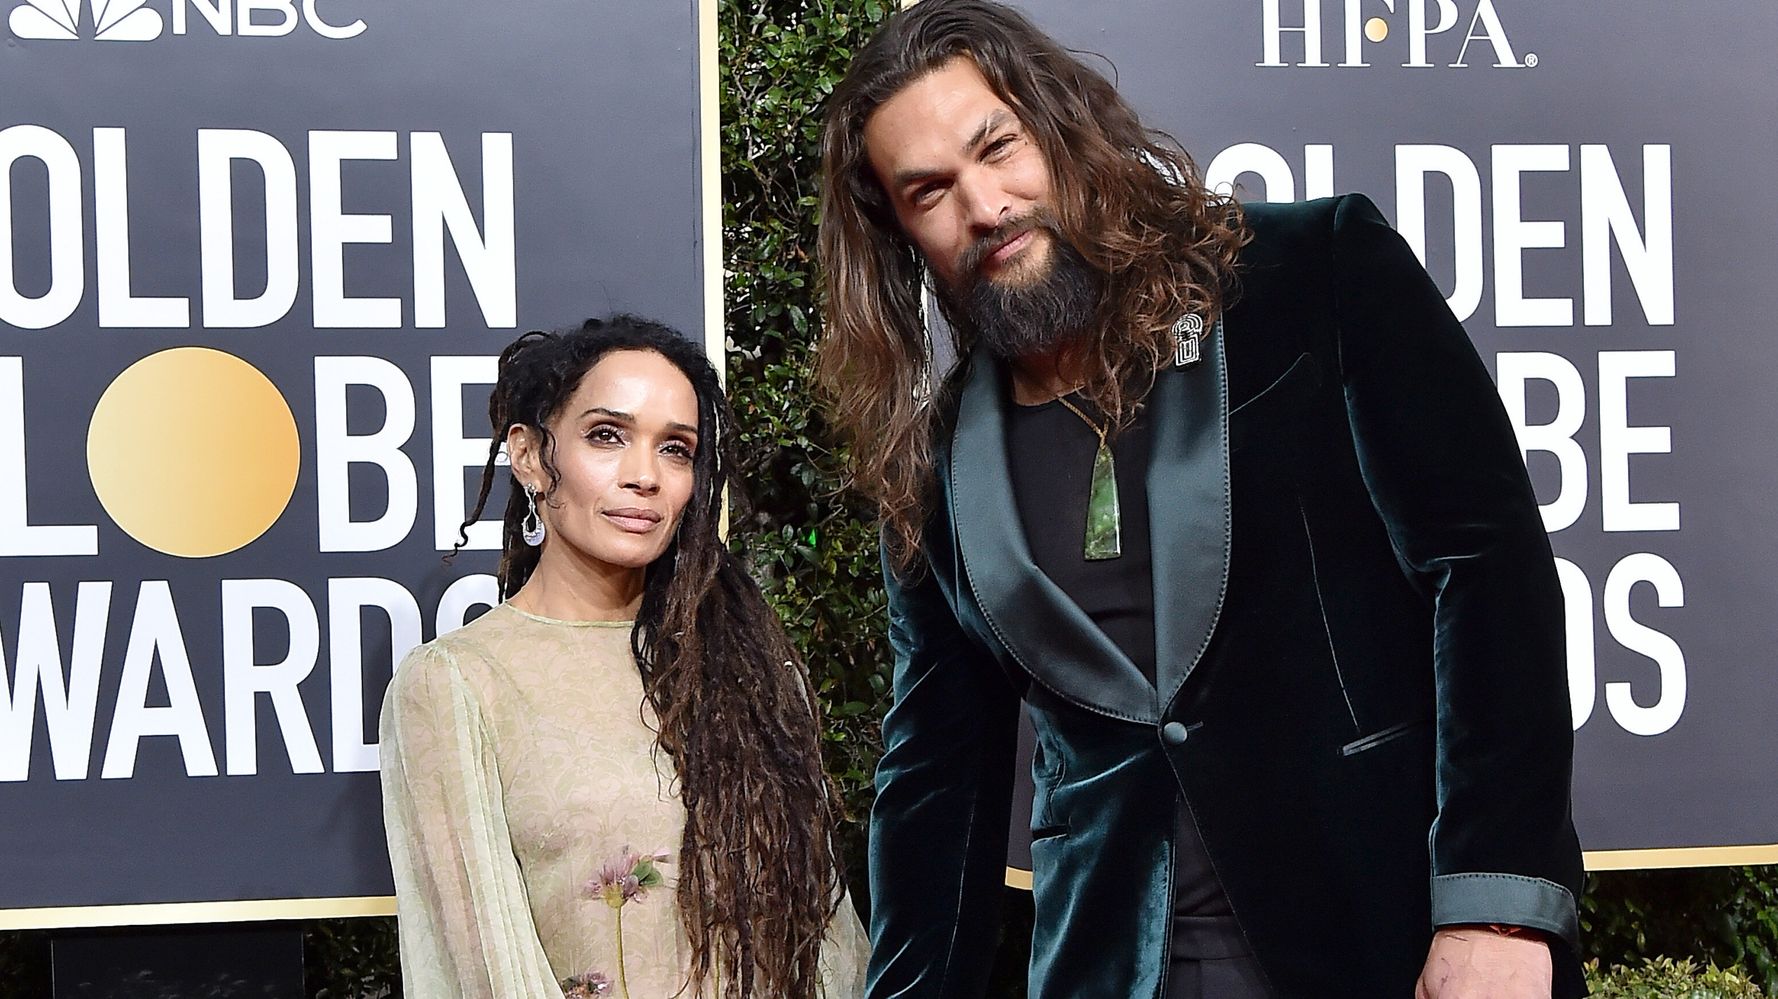 Jason Momoa Says He And Lisa Bonet Were 'Starving' After He Died On 'Game of Thrones'